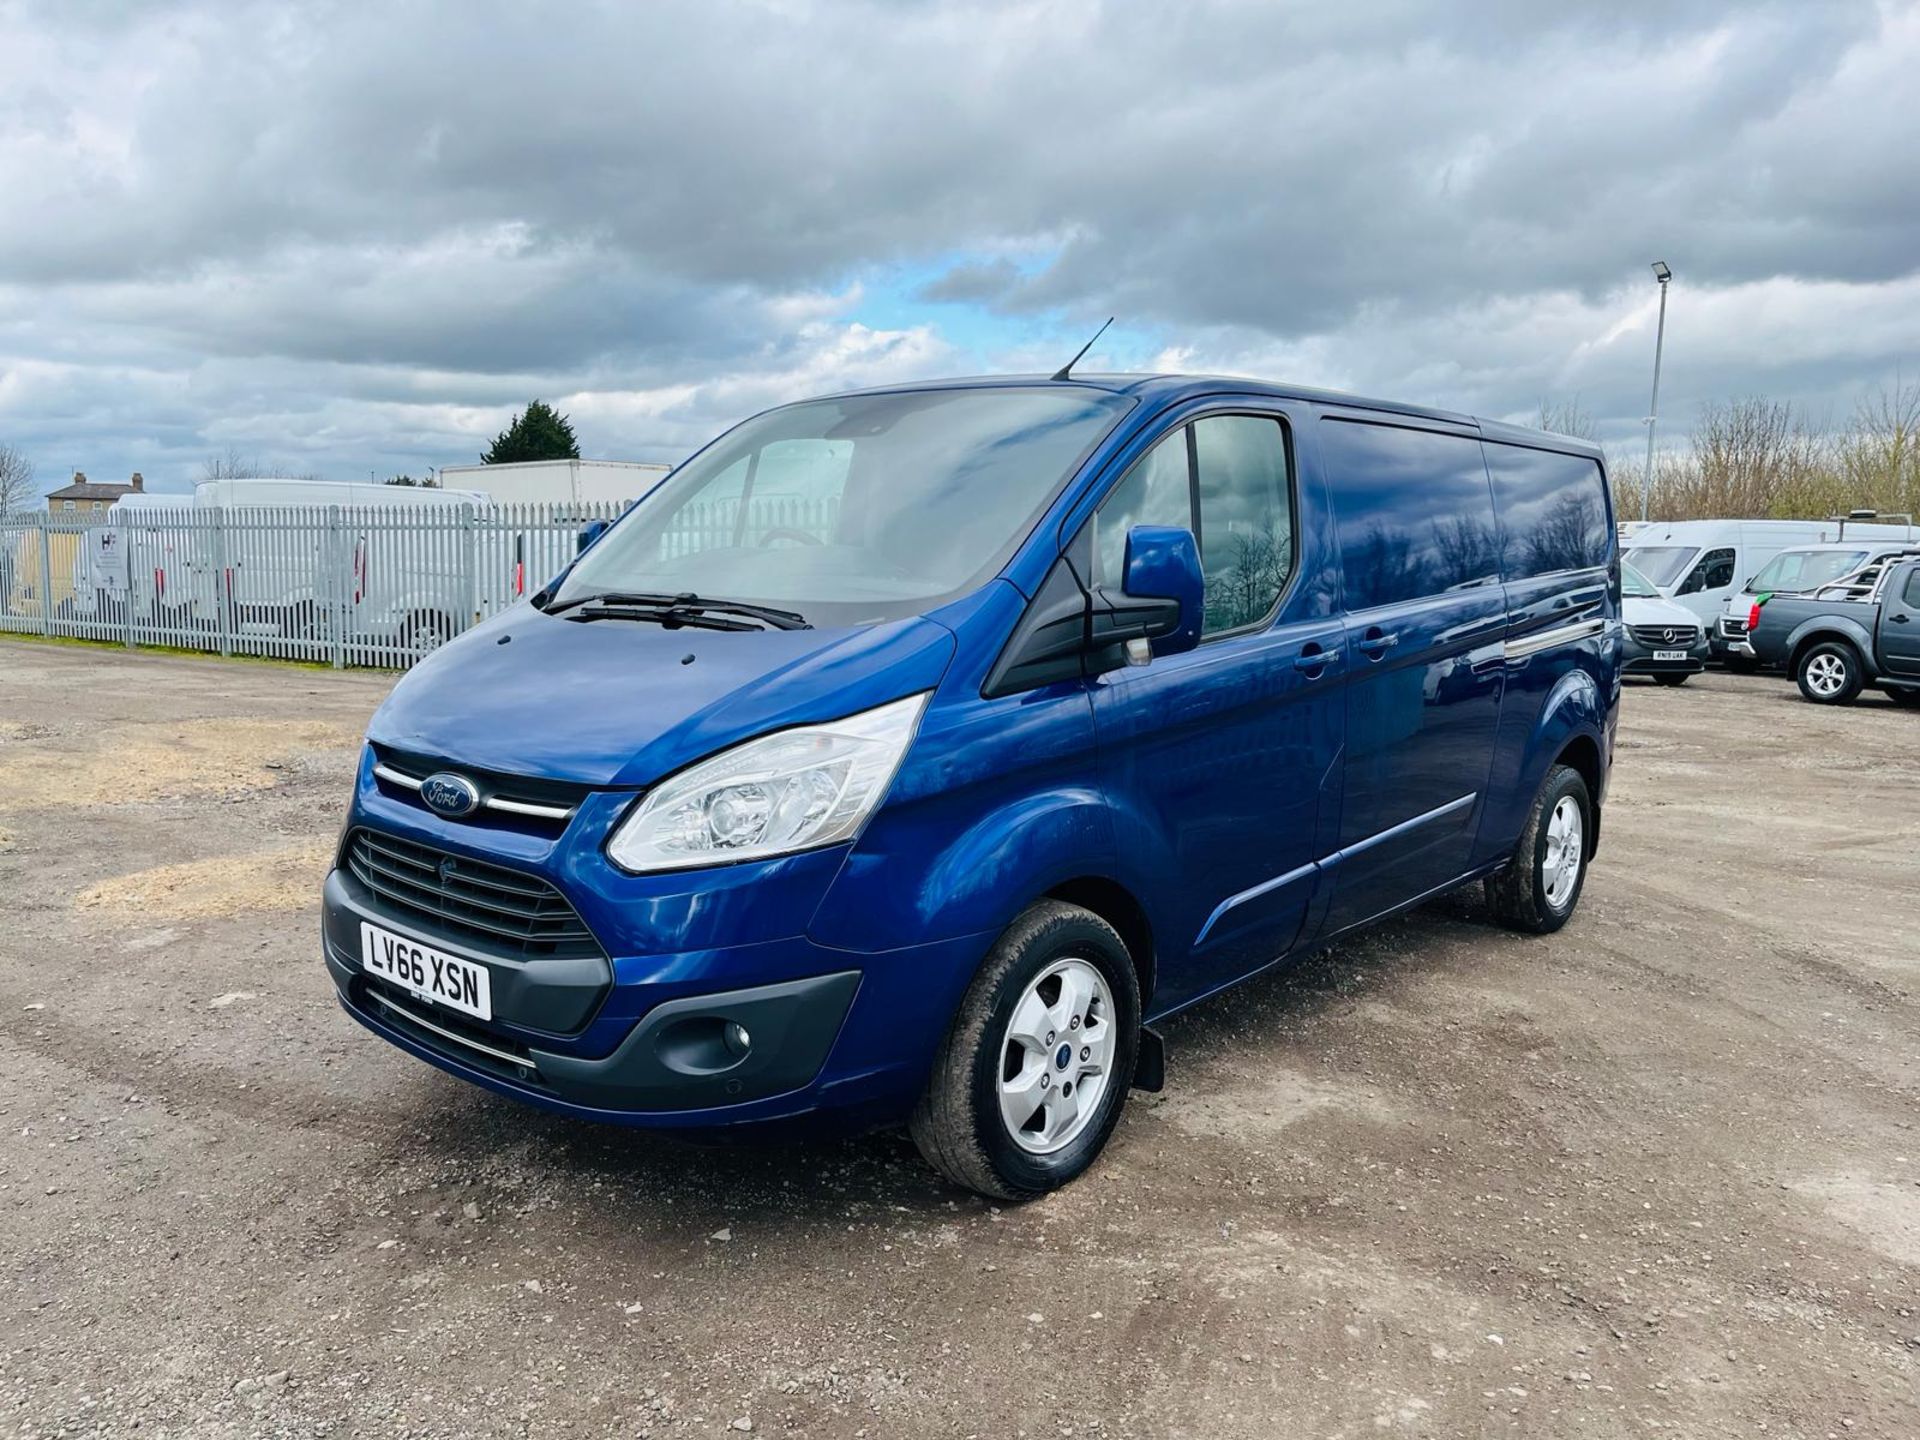 ** ON SALE ** Ford Transit Custom Limited 130 290 L3 H1 2.0 TDCI - ULEZ Compliant -Air Conditioning - Image 3 of 28